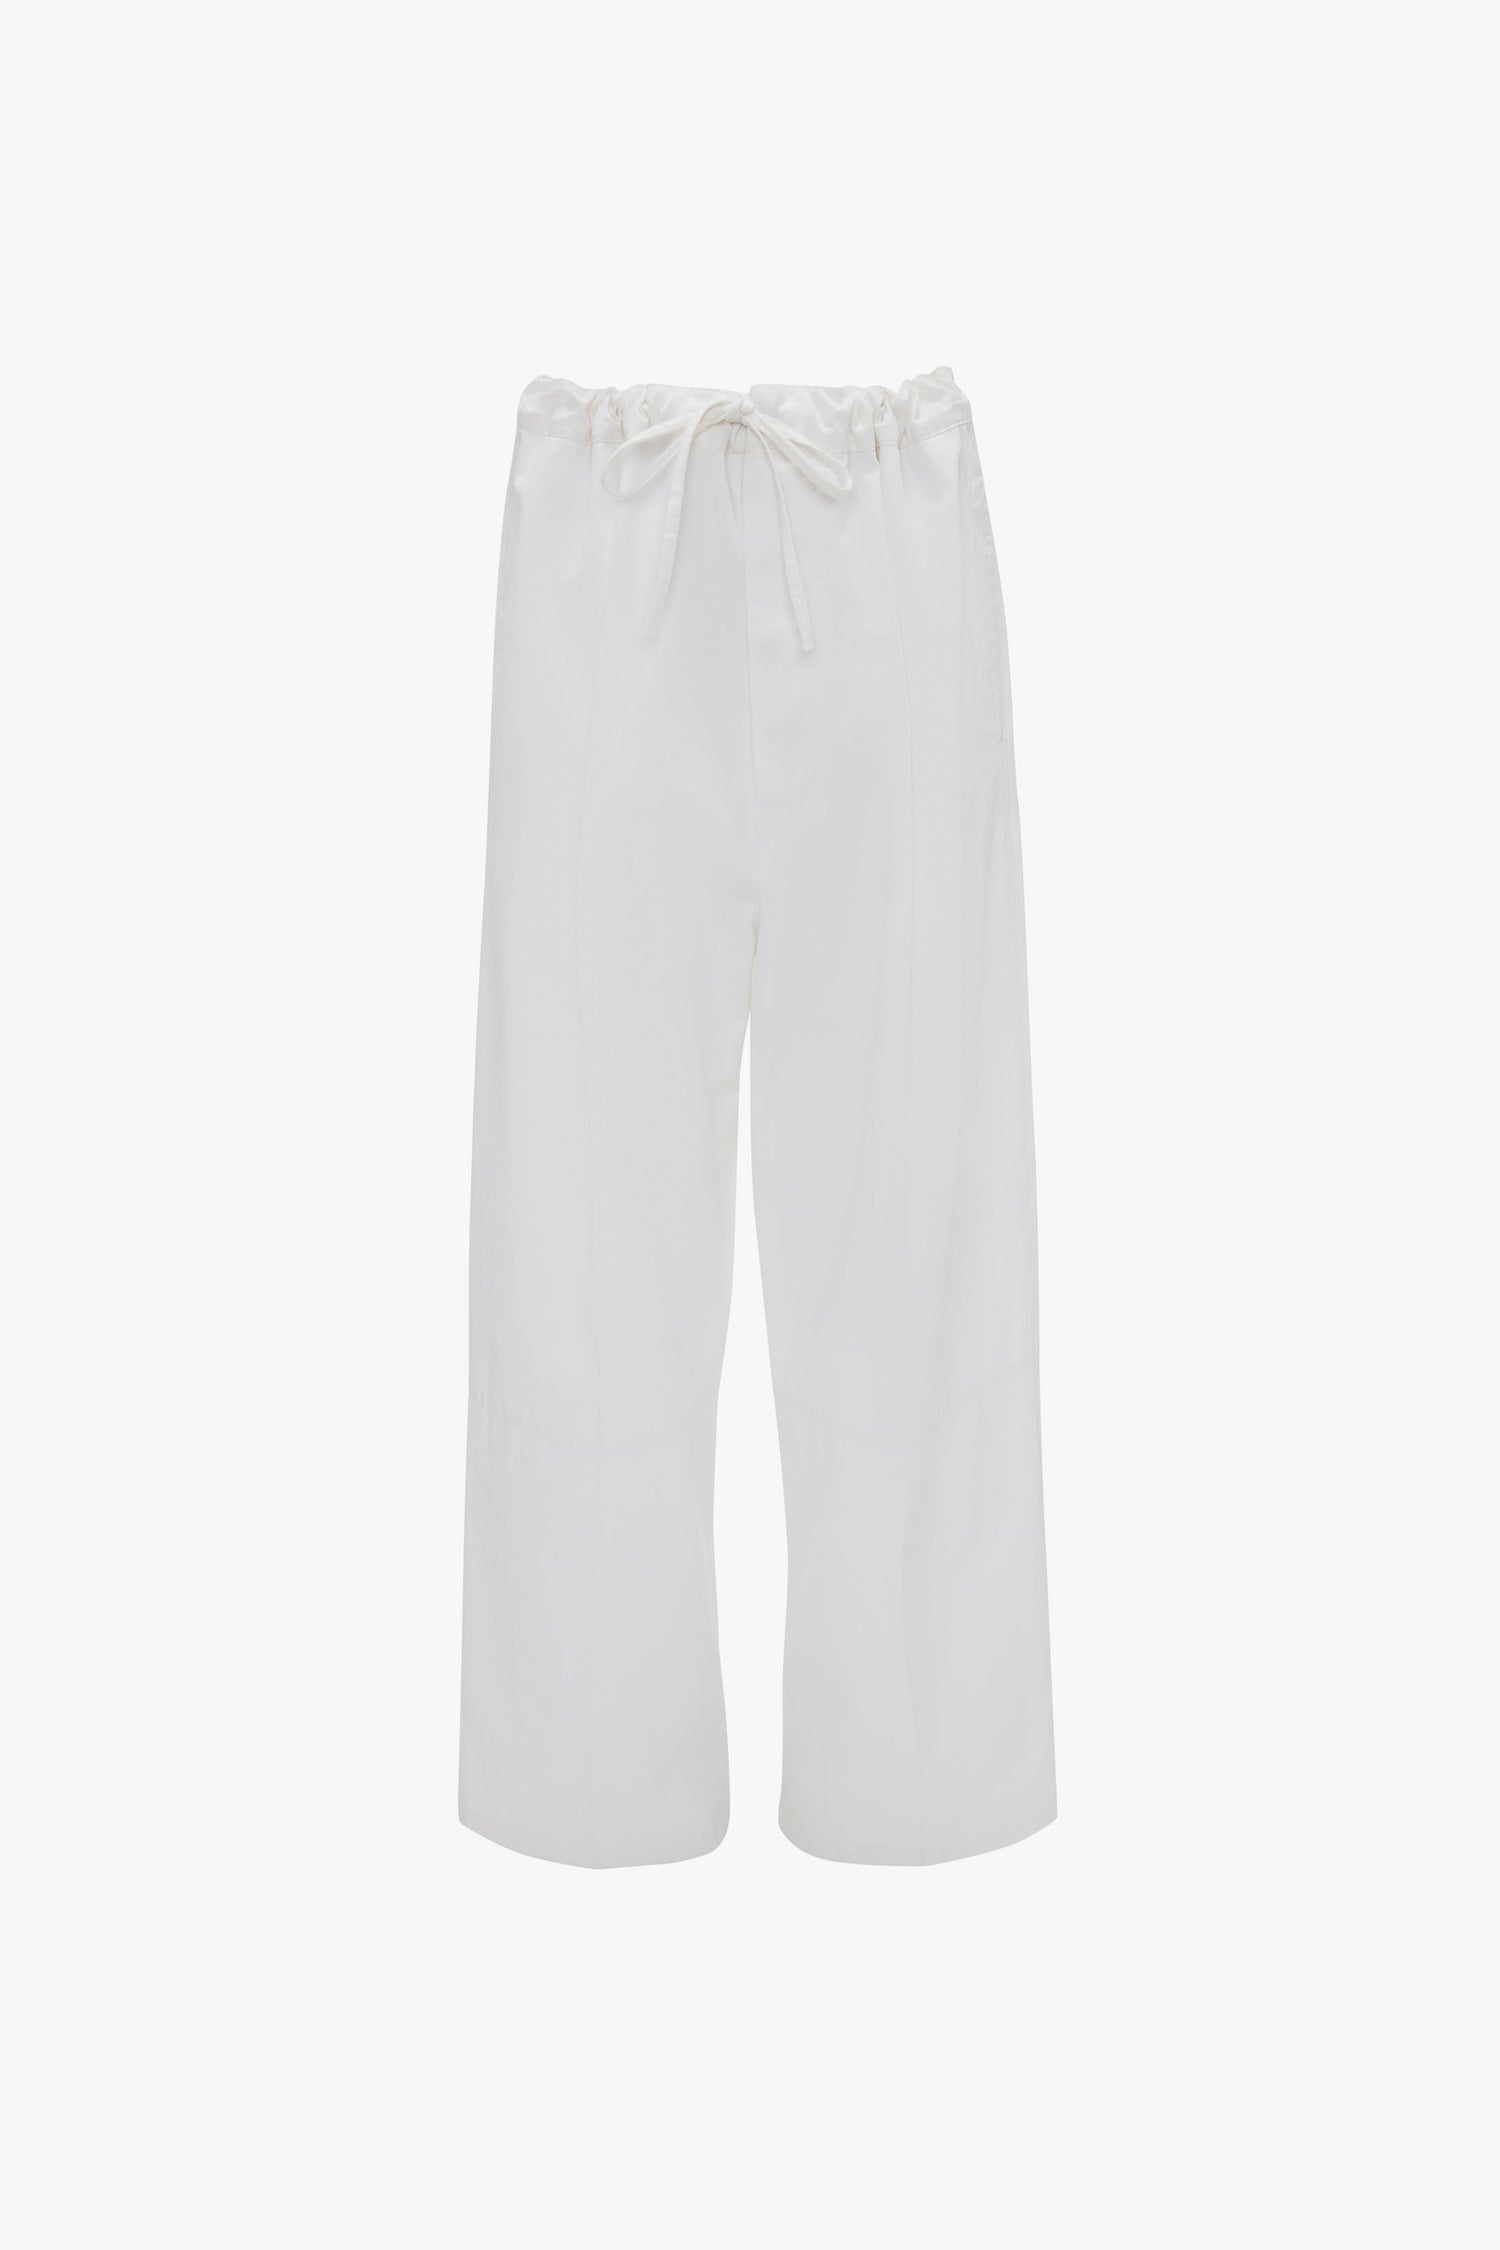 White wide-leg drawstring pyjama trousers in washed white by Victoria Beckham isolated on a white background.